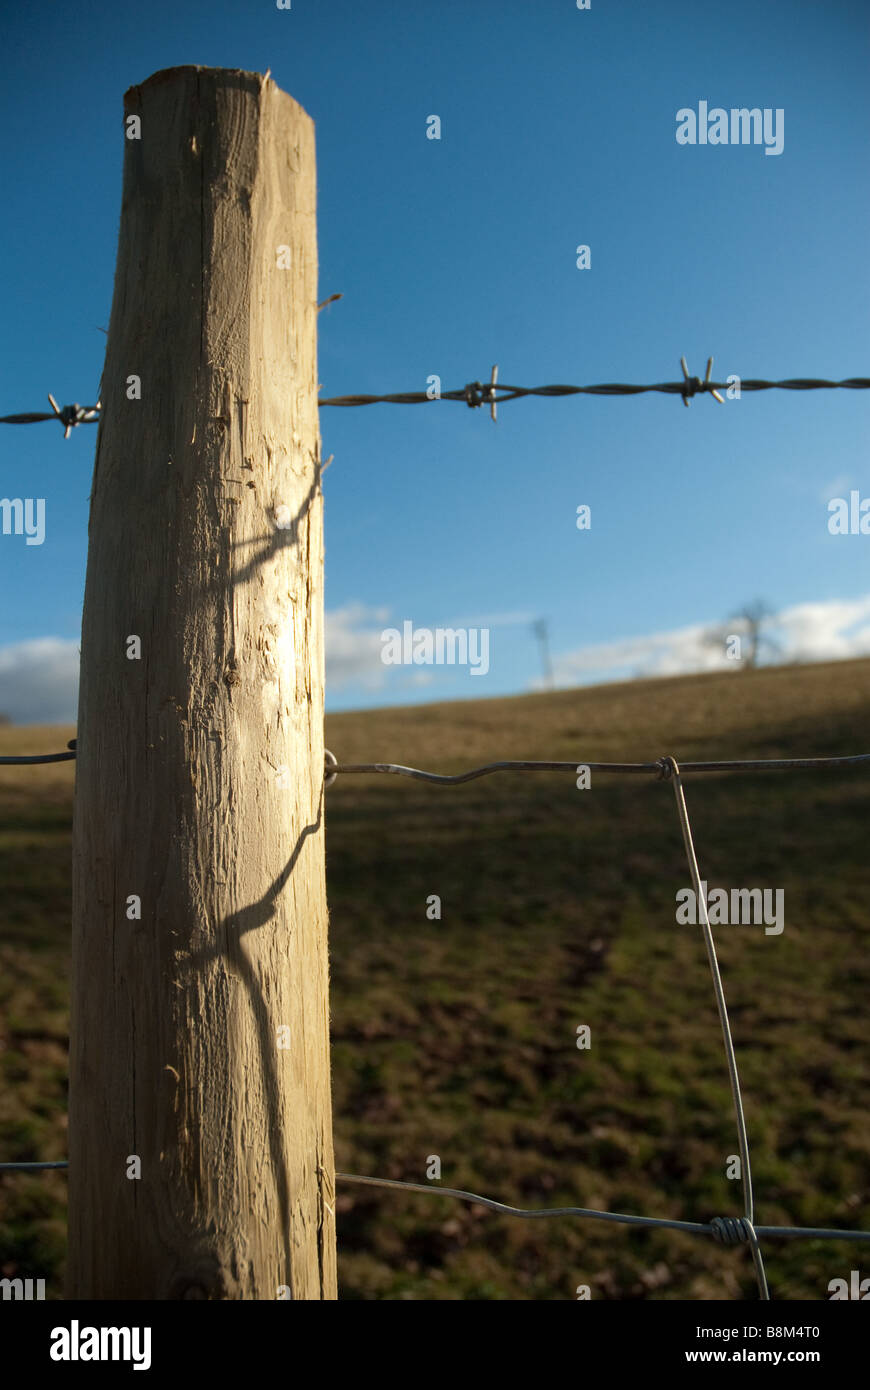 Barbed wire fence post in field Stock Photo